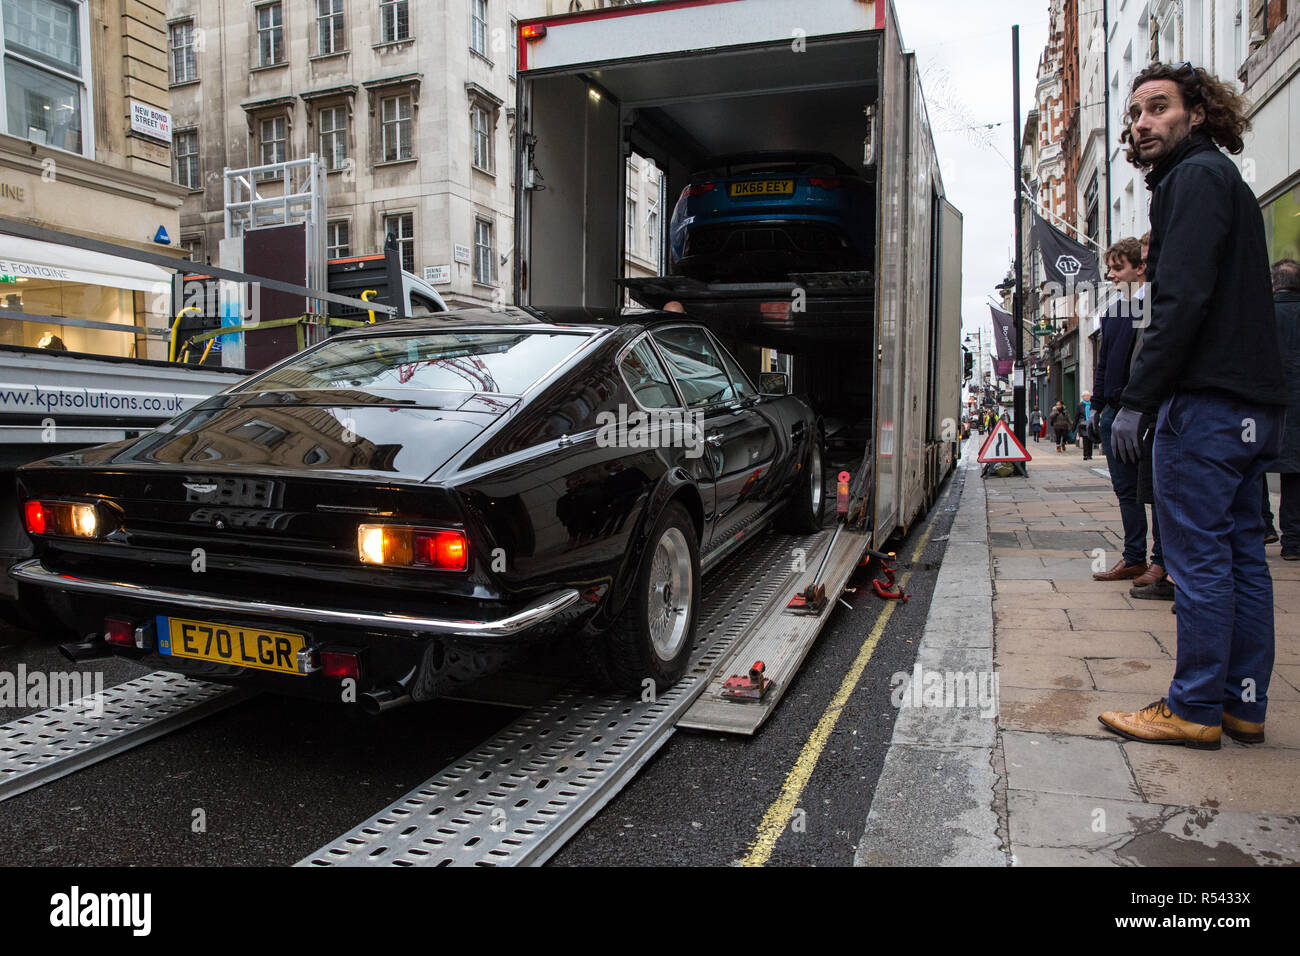 London, UK. 29th November, 2018. Bonhams' staff move a 1988 Aston Martin V8 Vantage X-Pack Sports Saloon, one of only around 130 built, in preparation for an auction of historic and high-performance racing and road cars. Highlights include a Le Mans class-winning Jaguar XJ220C driven by David Coulthard (£2,200,000-2,800,000), a Lister Jaguar Knobbly (£2,200,000-2,800,000) and a 1958 BMW 507 owned by its designer, as well as Ferraris, Aston Martins, Bentleys, Porsches and Jaguars. Credit: Mark Kerrison/Alamy Live News Stock Photo